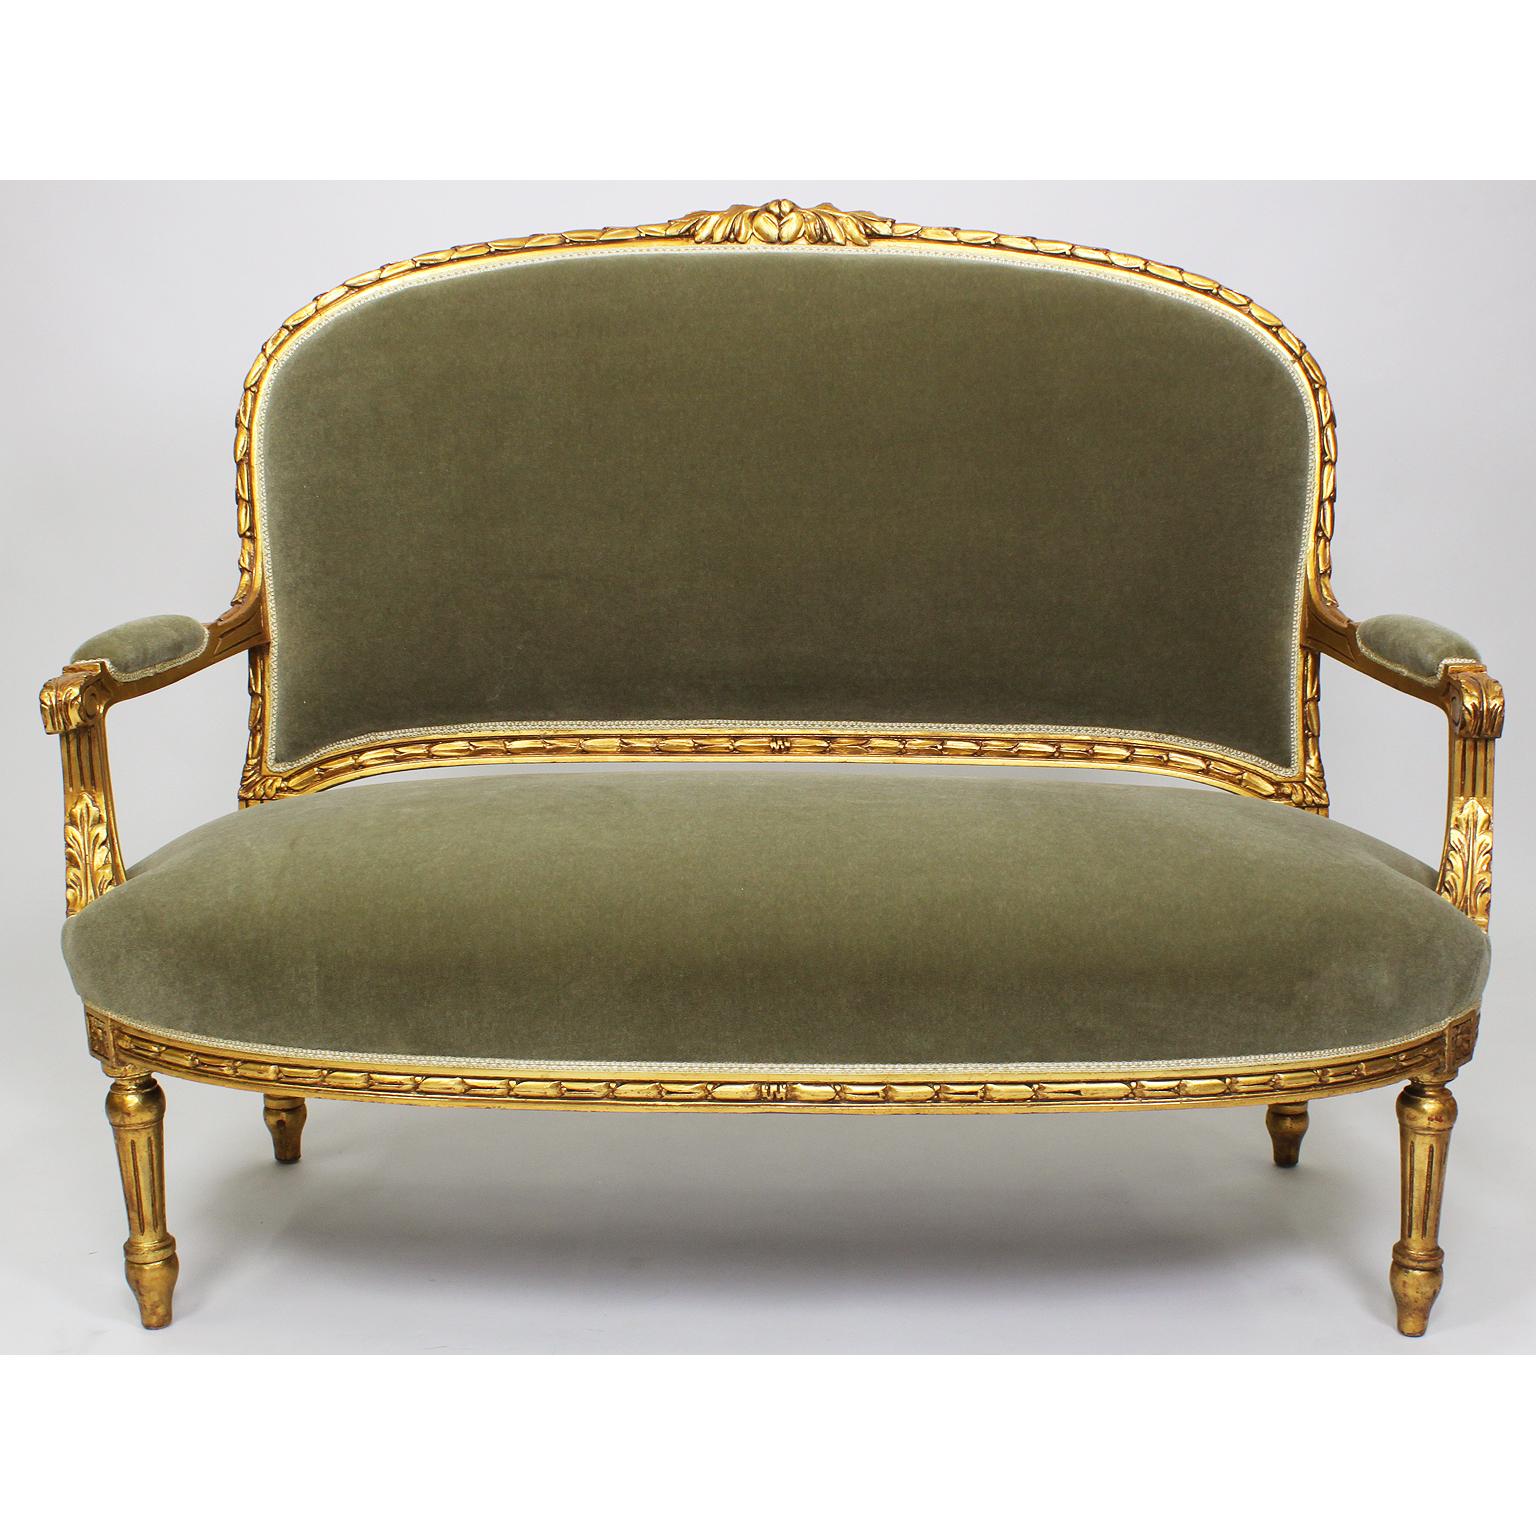 Early 20th Century Five Piece French Louis XVI Style Giltwood Carved Salon 'Parlor' Suite